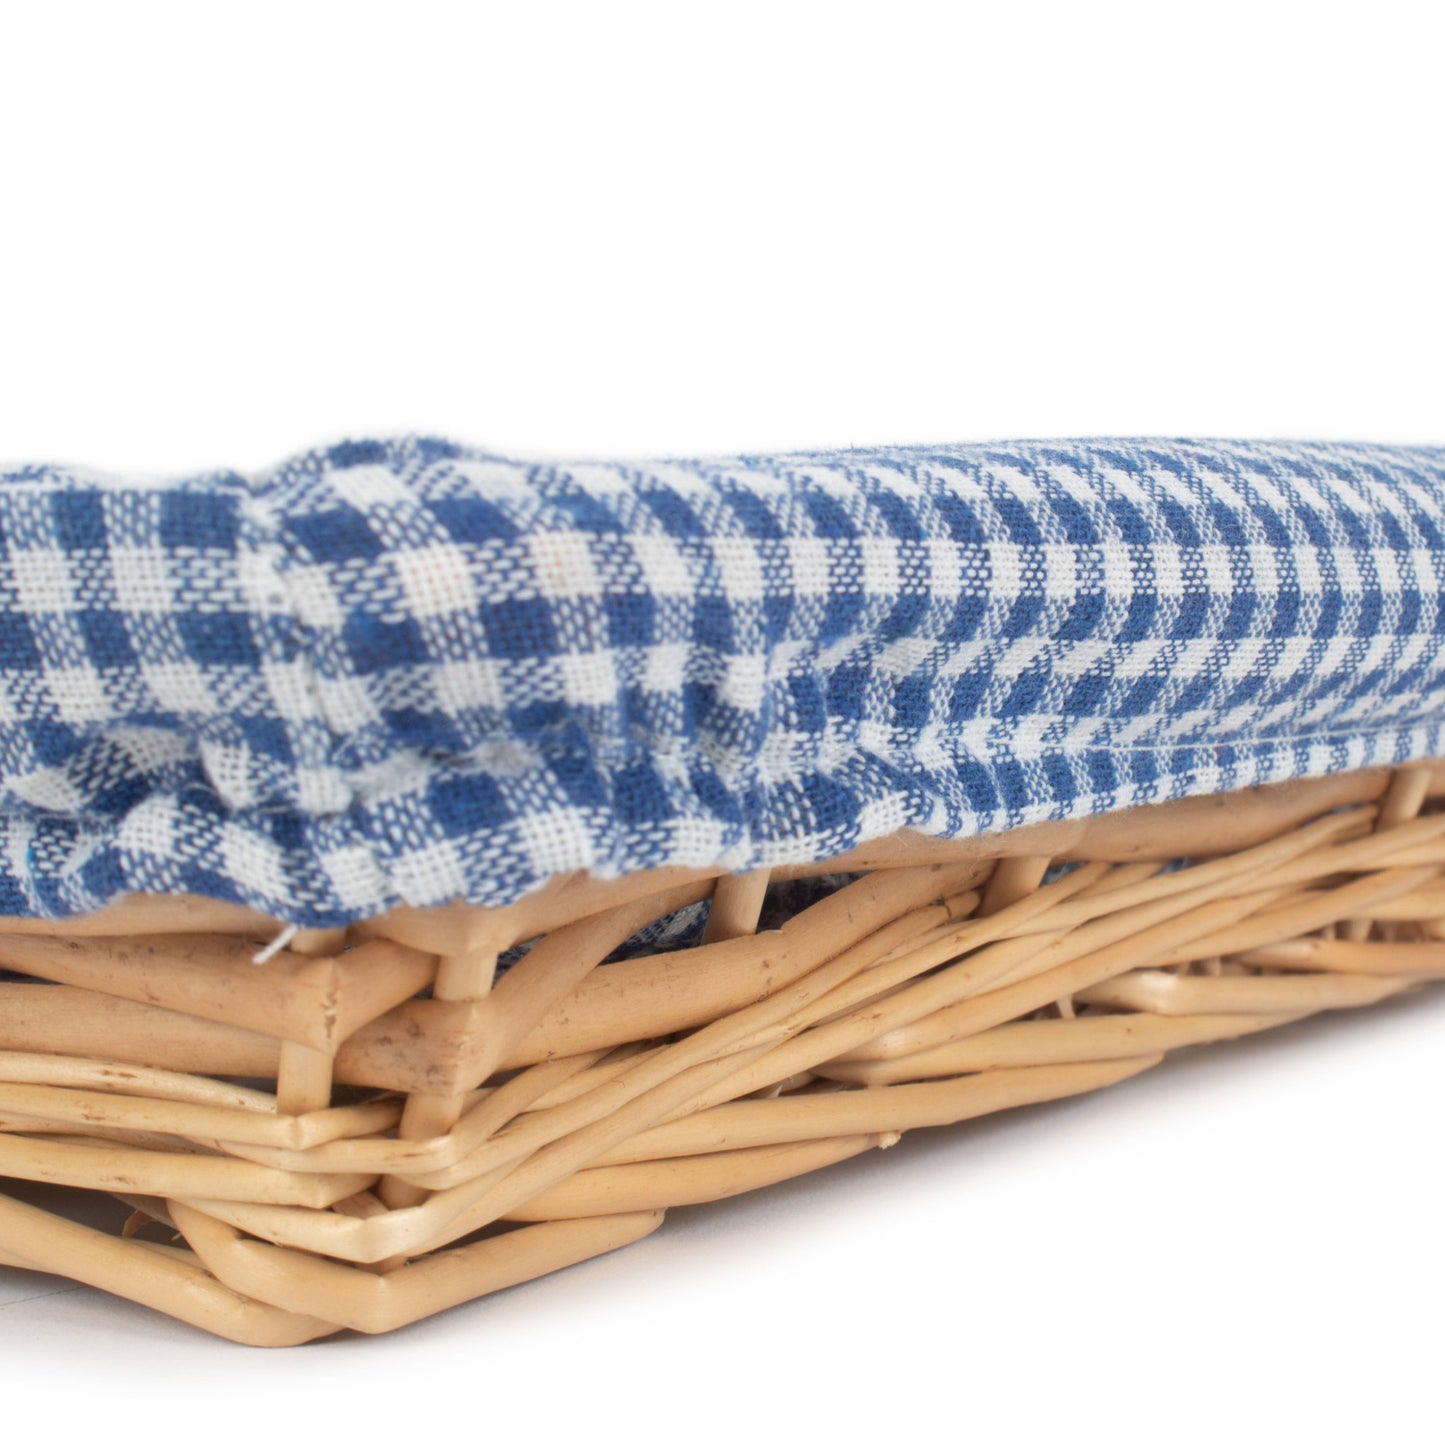 Rectangular Flat Split Willow Tray With Blue & White Checked Lining